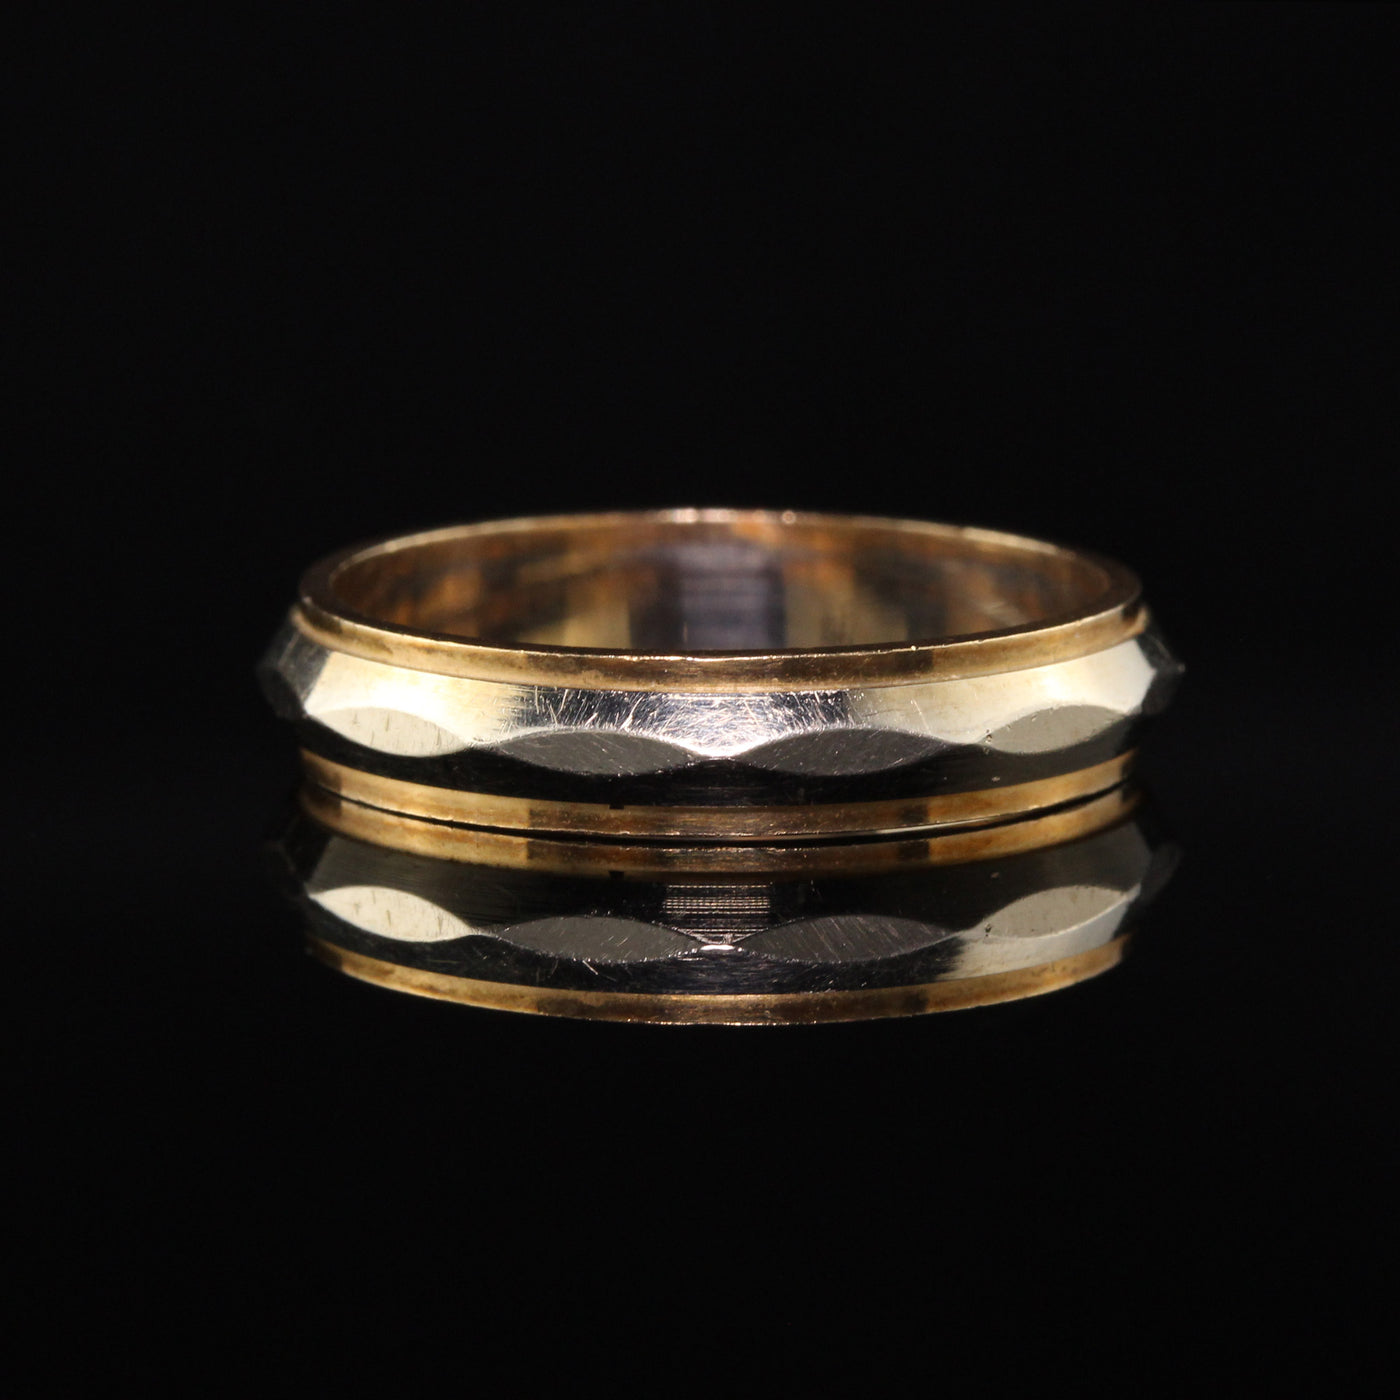 Antique Art Deco 14K Two Tone Yellow Gold Engraved Wedding Band - Size 10 1/2